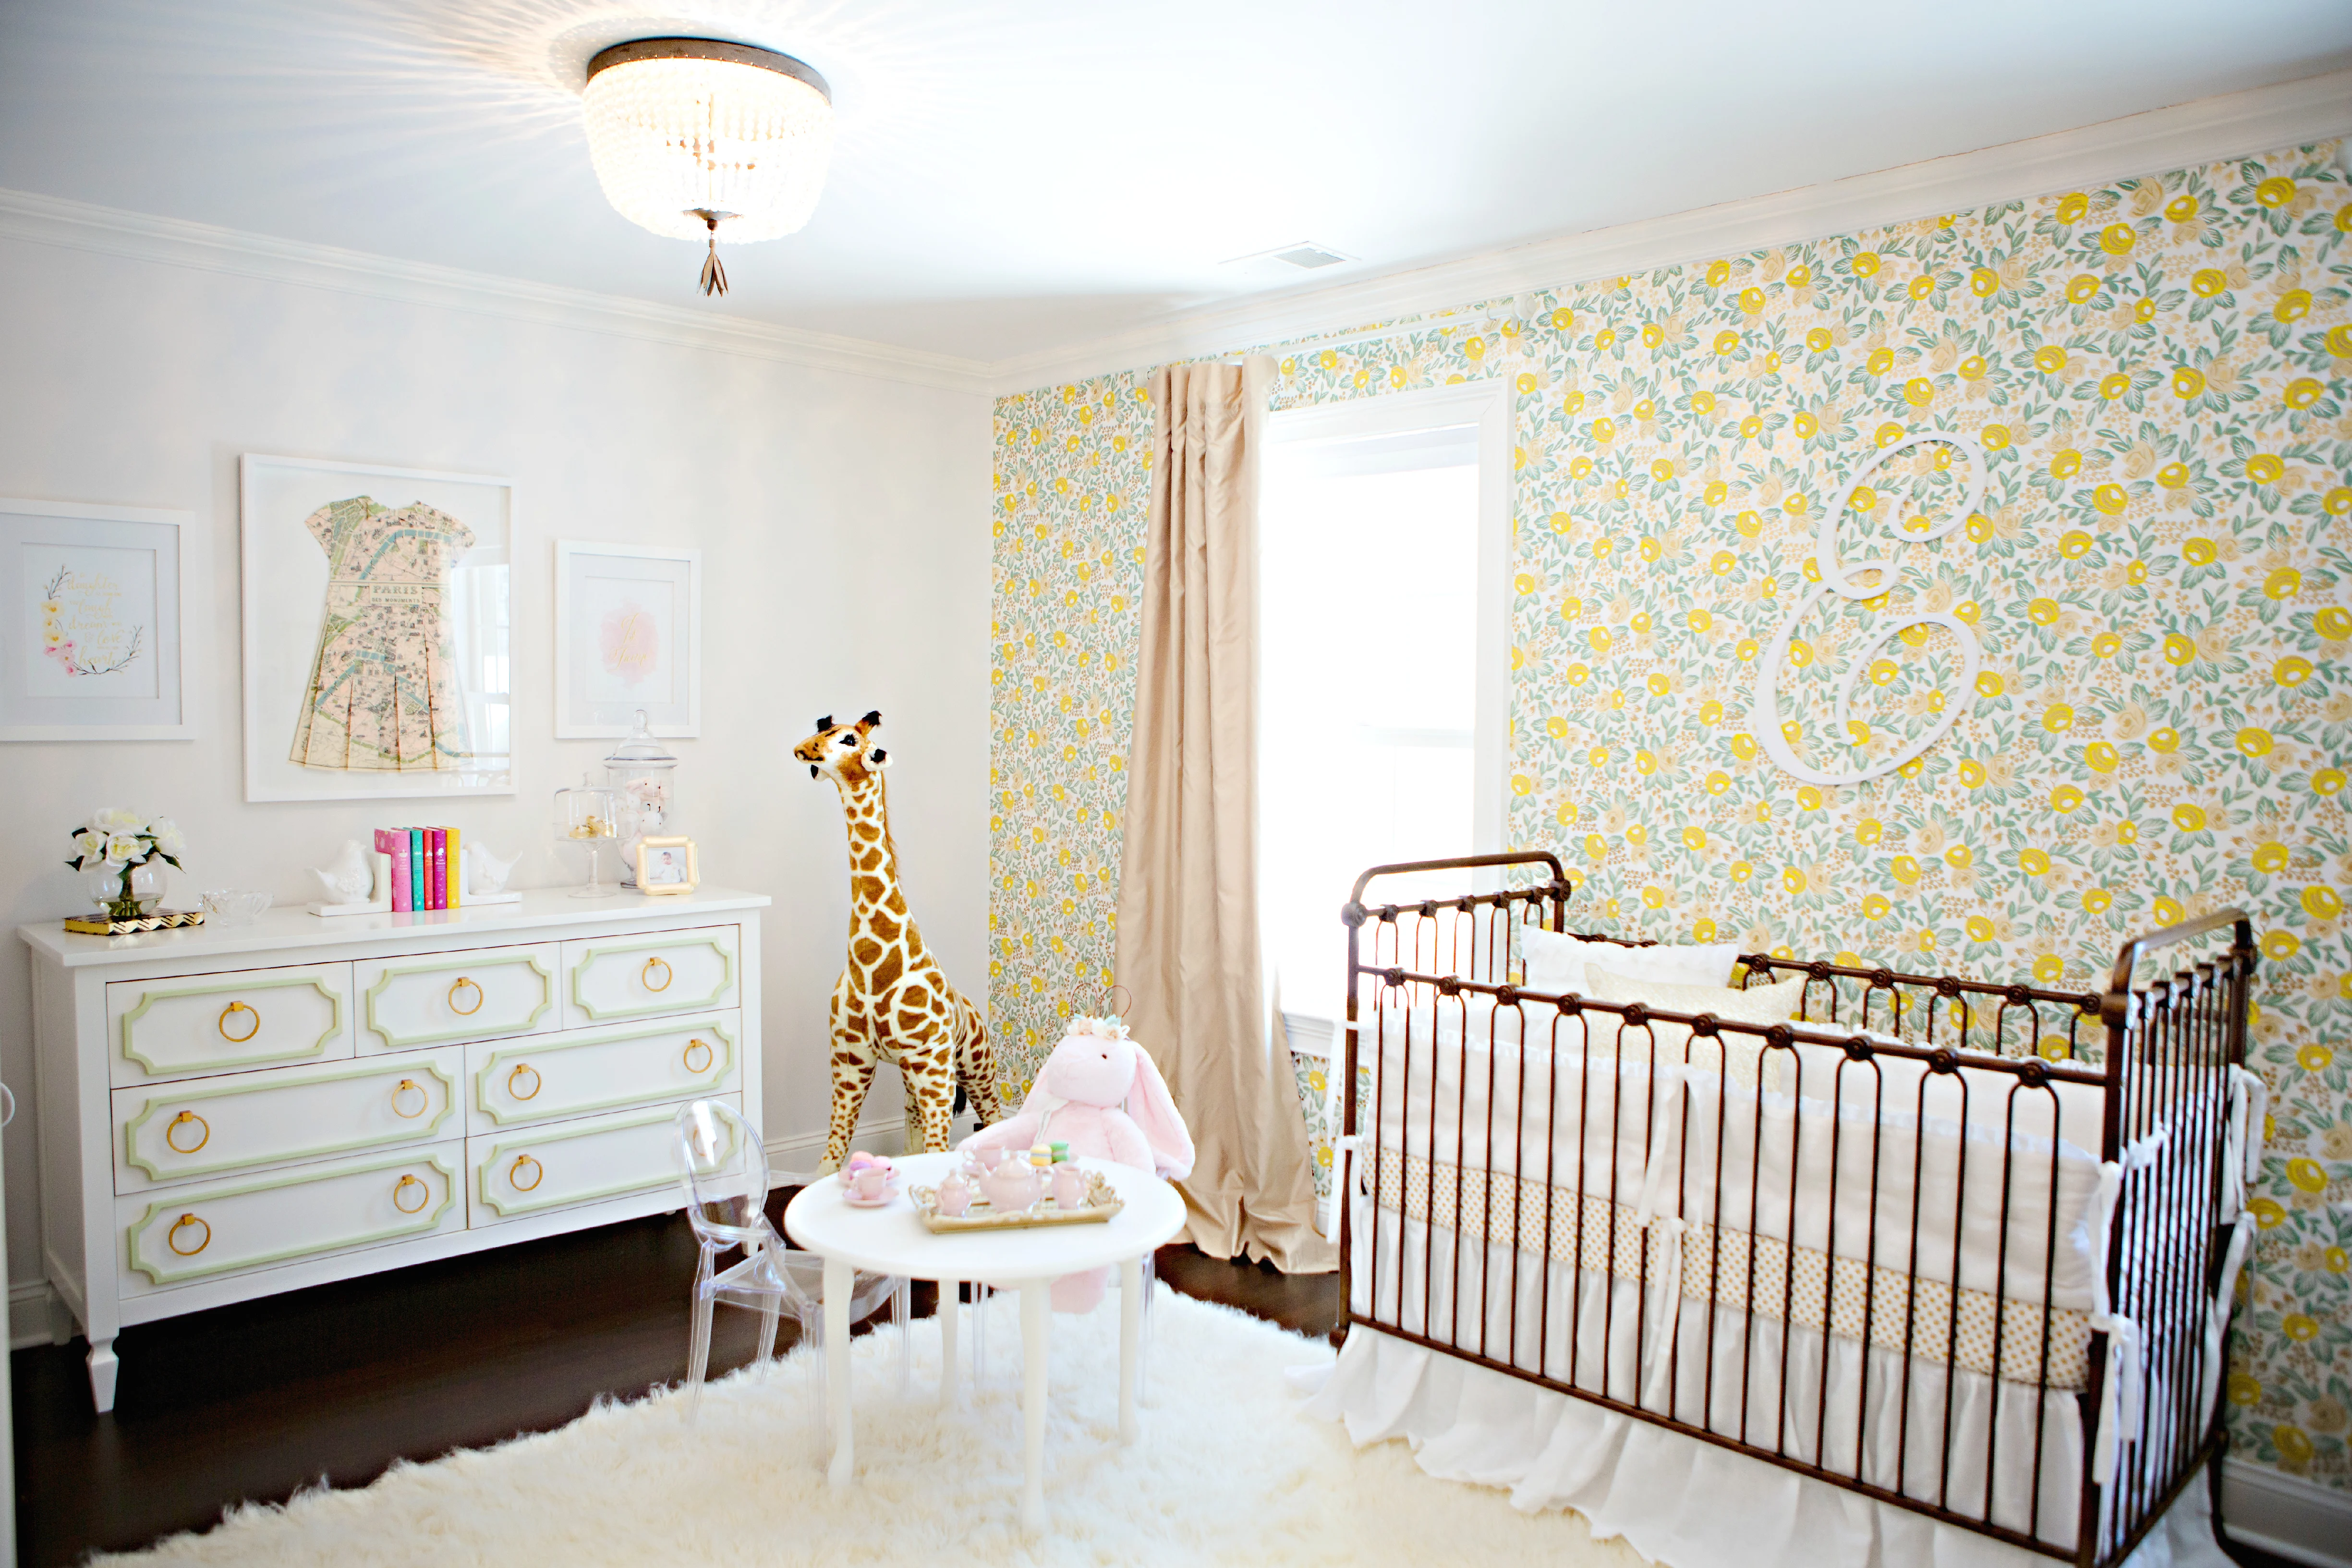 Girl's Nursery with Green and Yellow Floral Wallpaper - Project Nursery